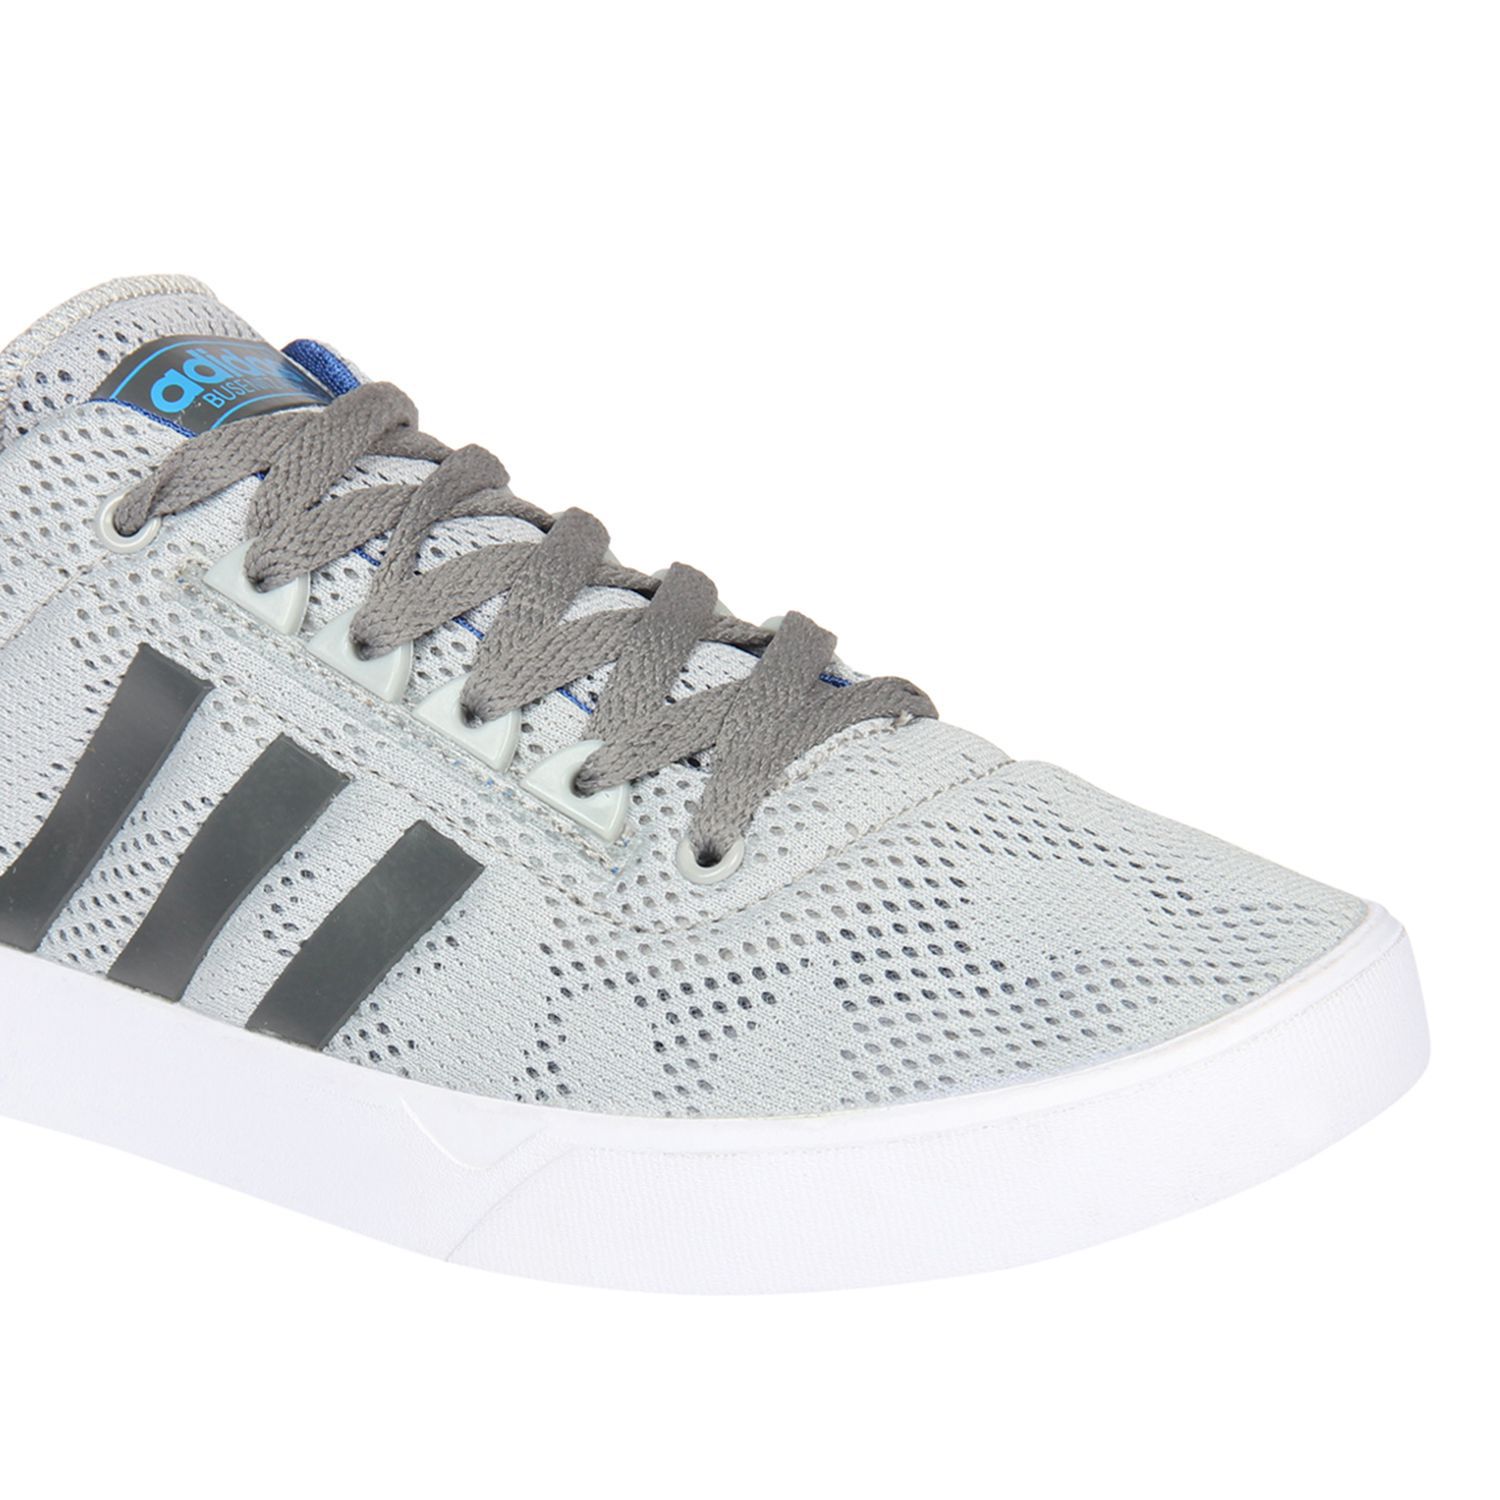 Adidas ADIDAS NEO 2 Sneakers Gray Casual Shoes - Buy Adidas ADIDAS NEO 2  Sneakers Gray Casual Shoes Online at Best Prices in India on Snapdeal